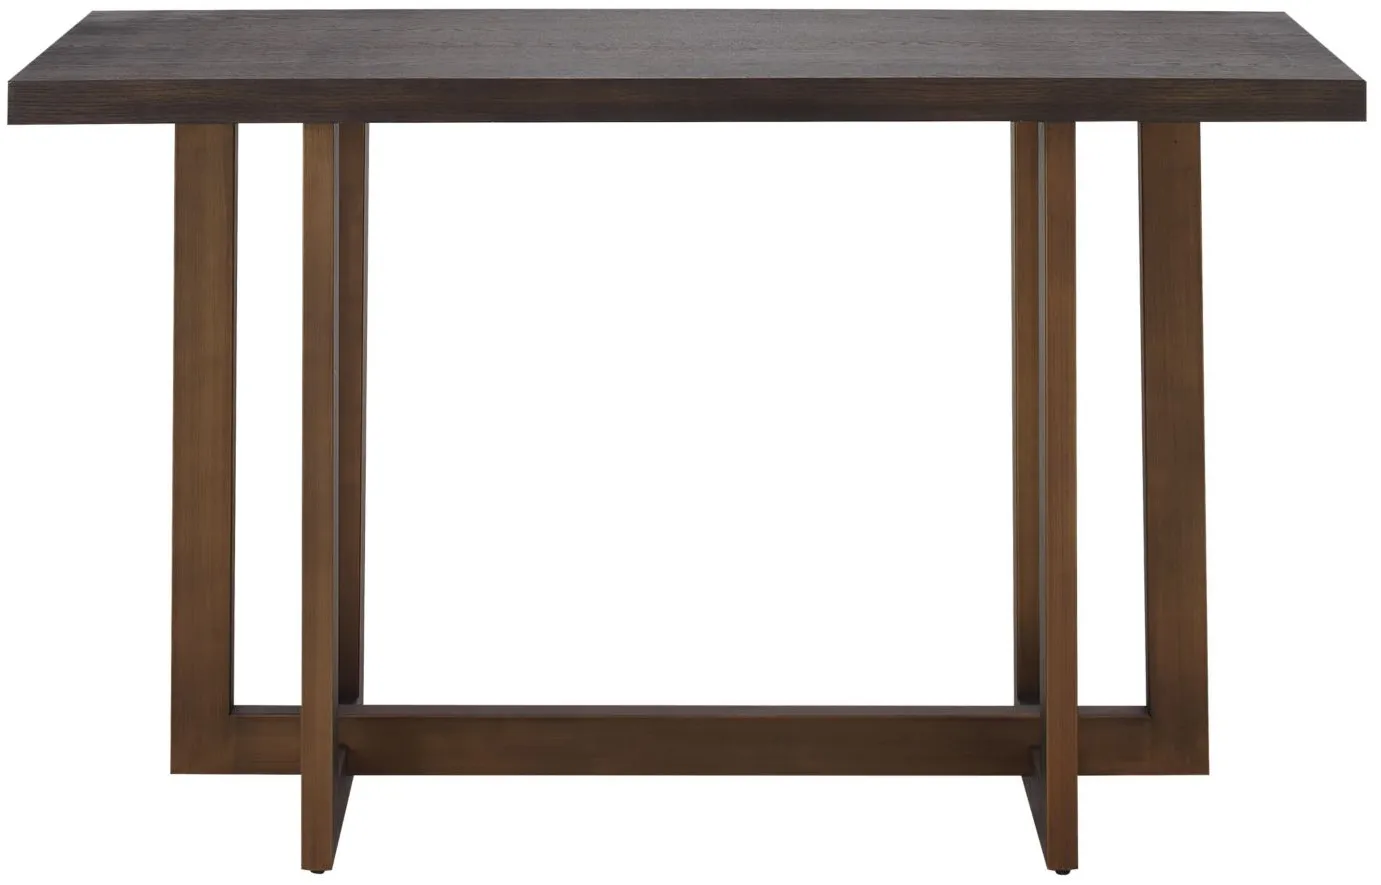 Calibri Rectangular Console Table in Umber by Riverside Furniture